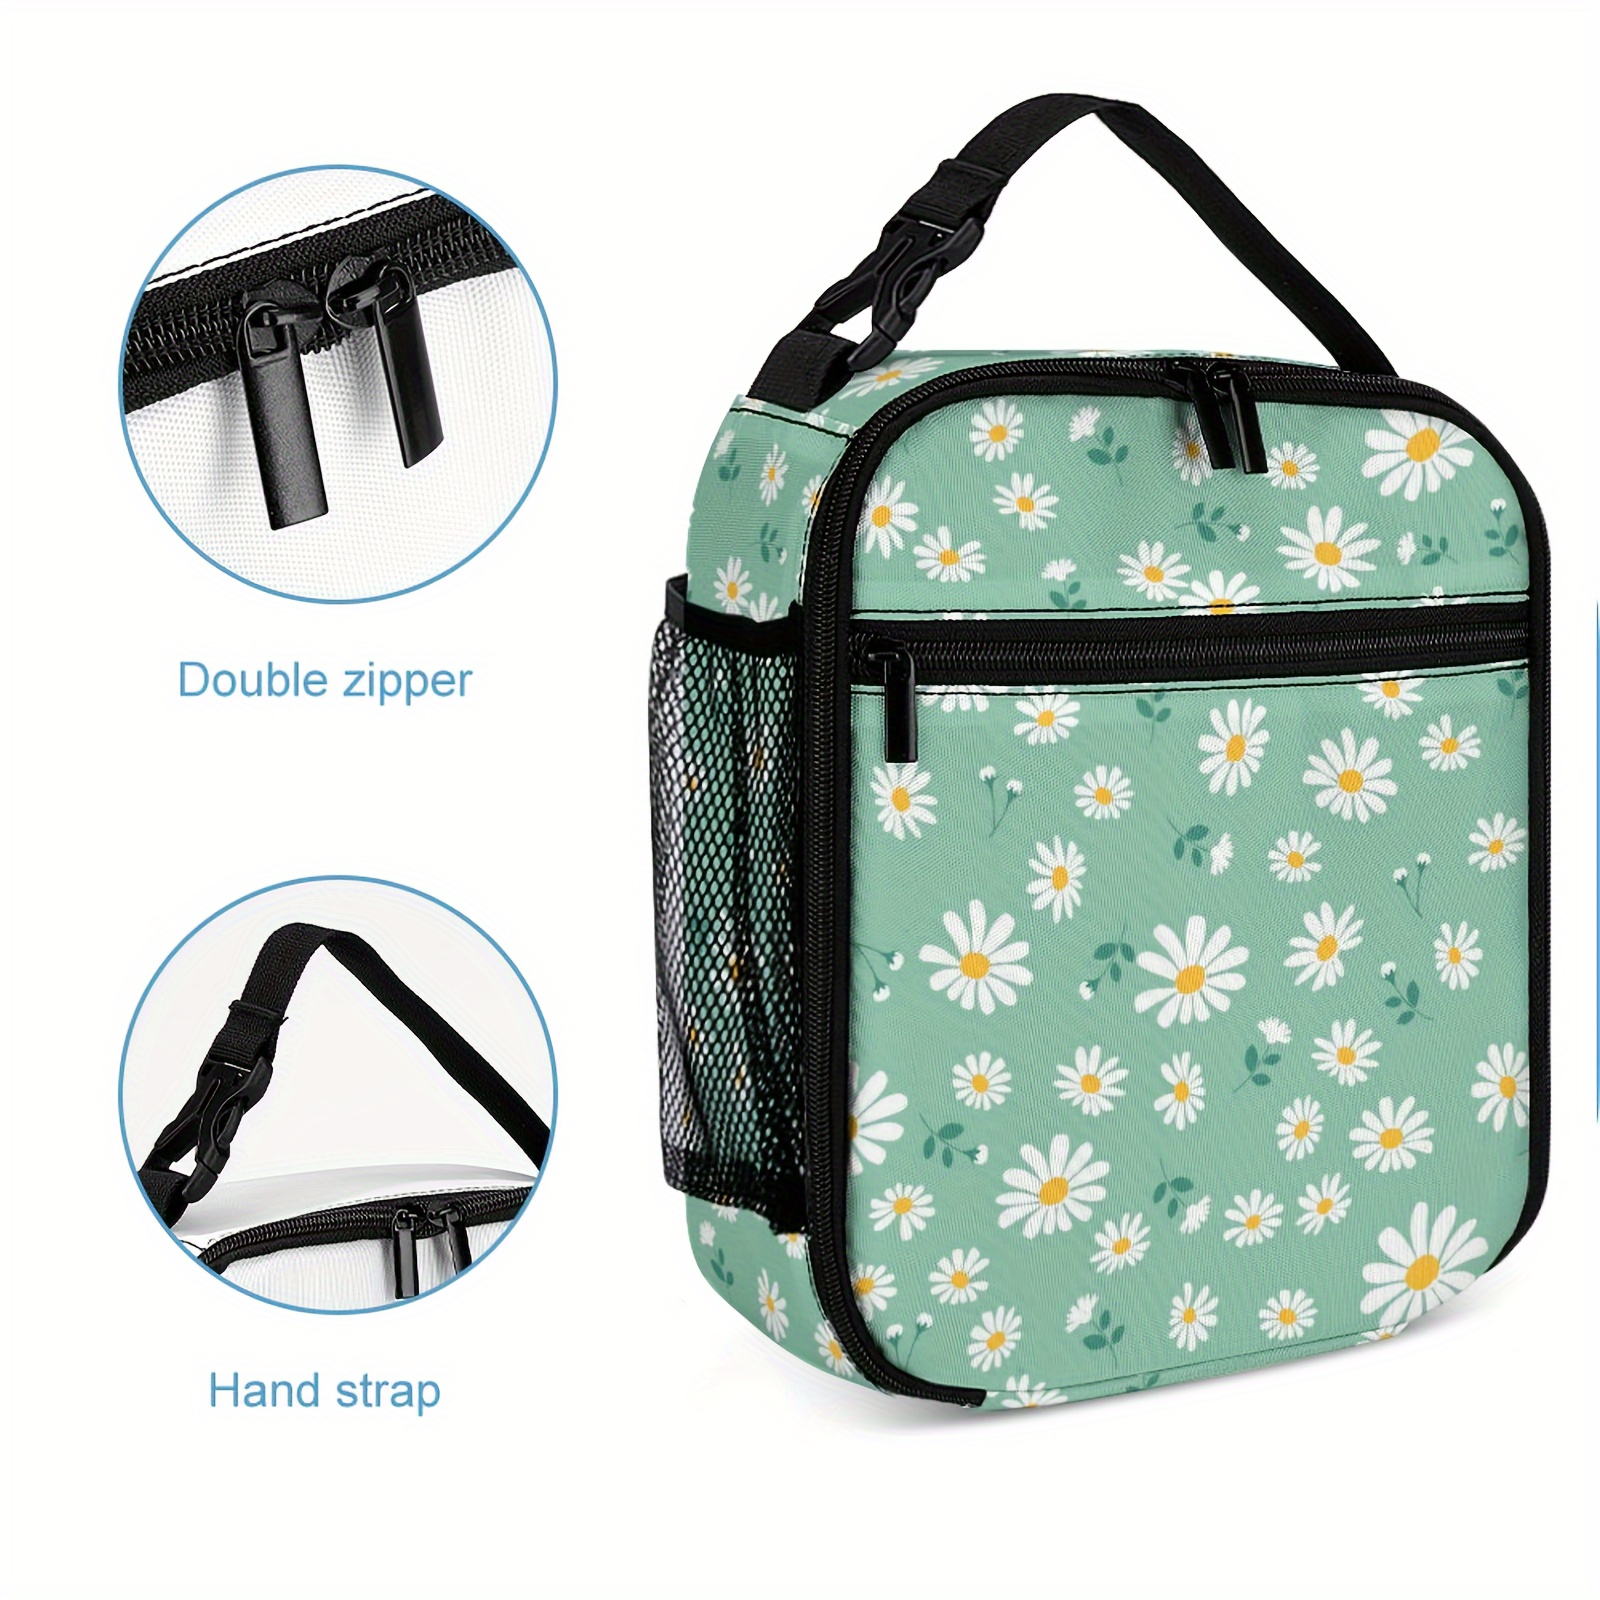 

1pc Portable Insulated Lunch Bag, Daisy Pattern Fresh Style Double Zipper Easy-to-clean Fabric For Outdoor Camping Picnic Insulated Lunch Box, Travel And Takeaway Food Container